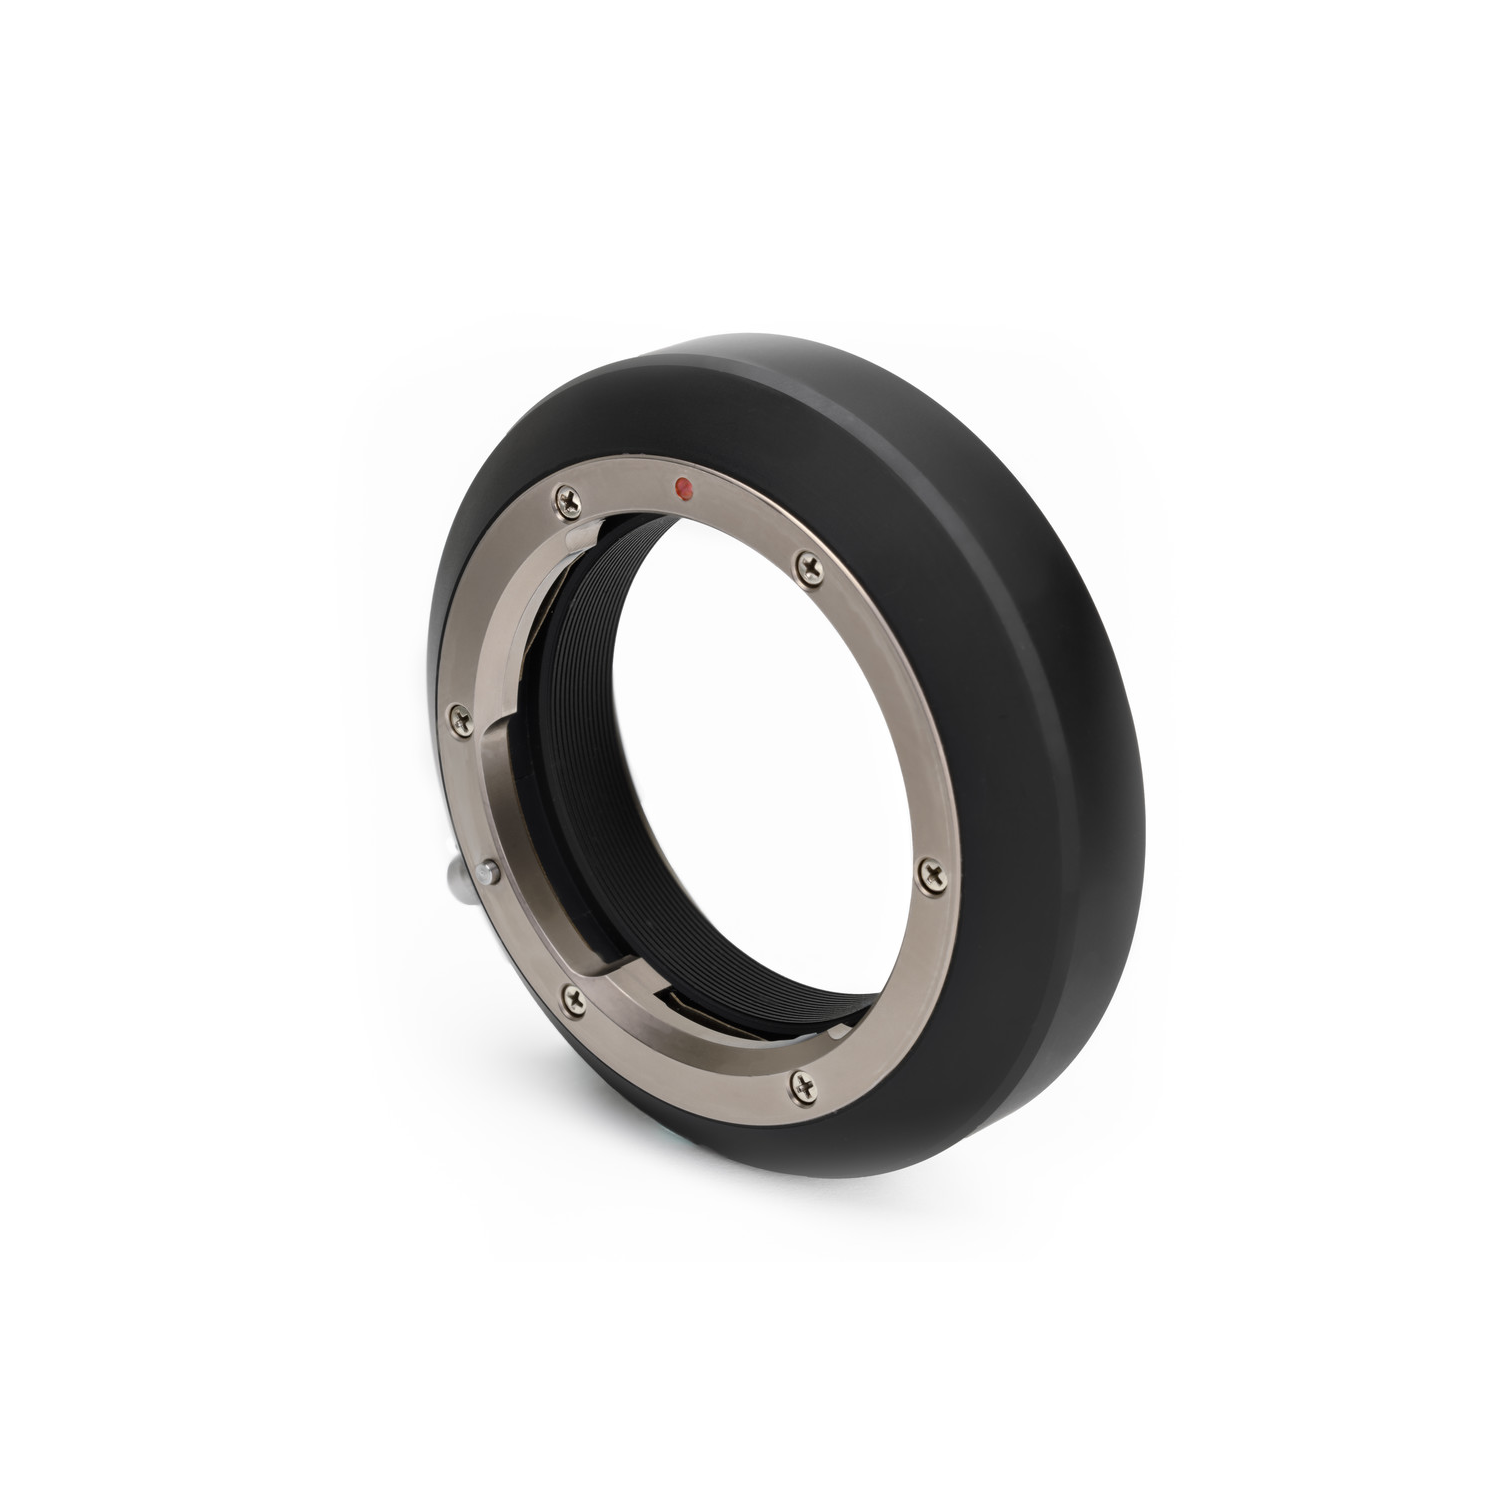 Hasselblad Xpan Lens Adapter For X1d